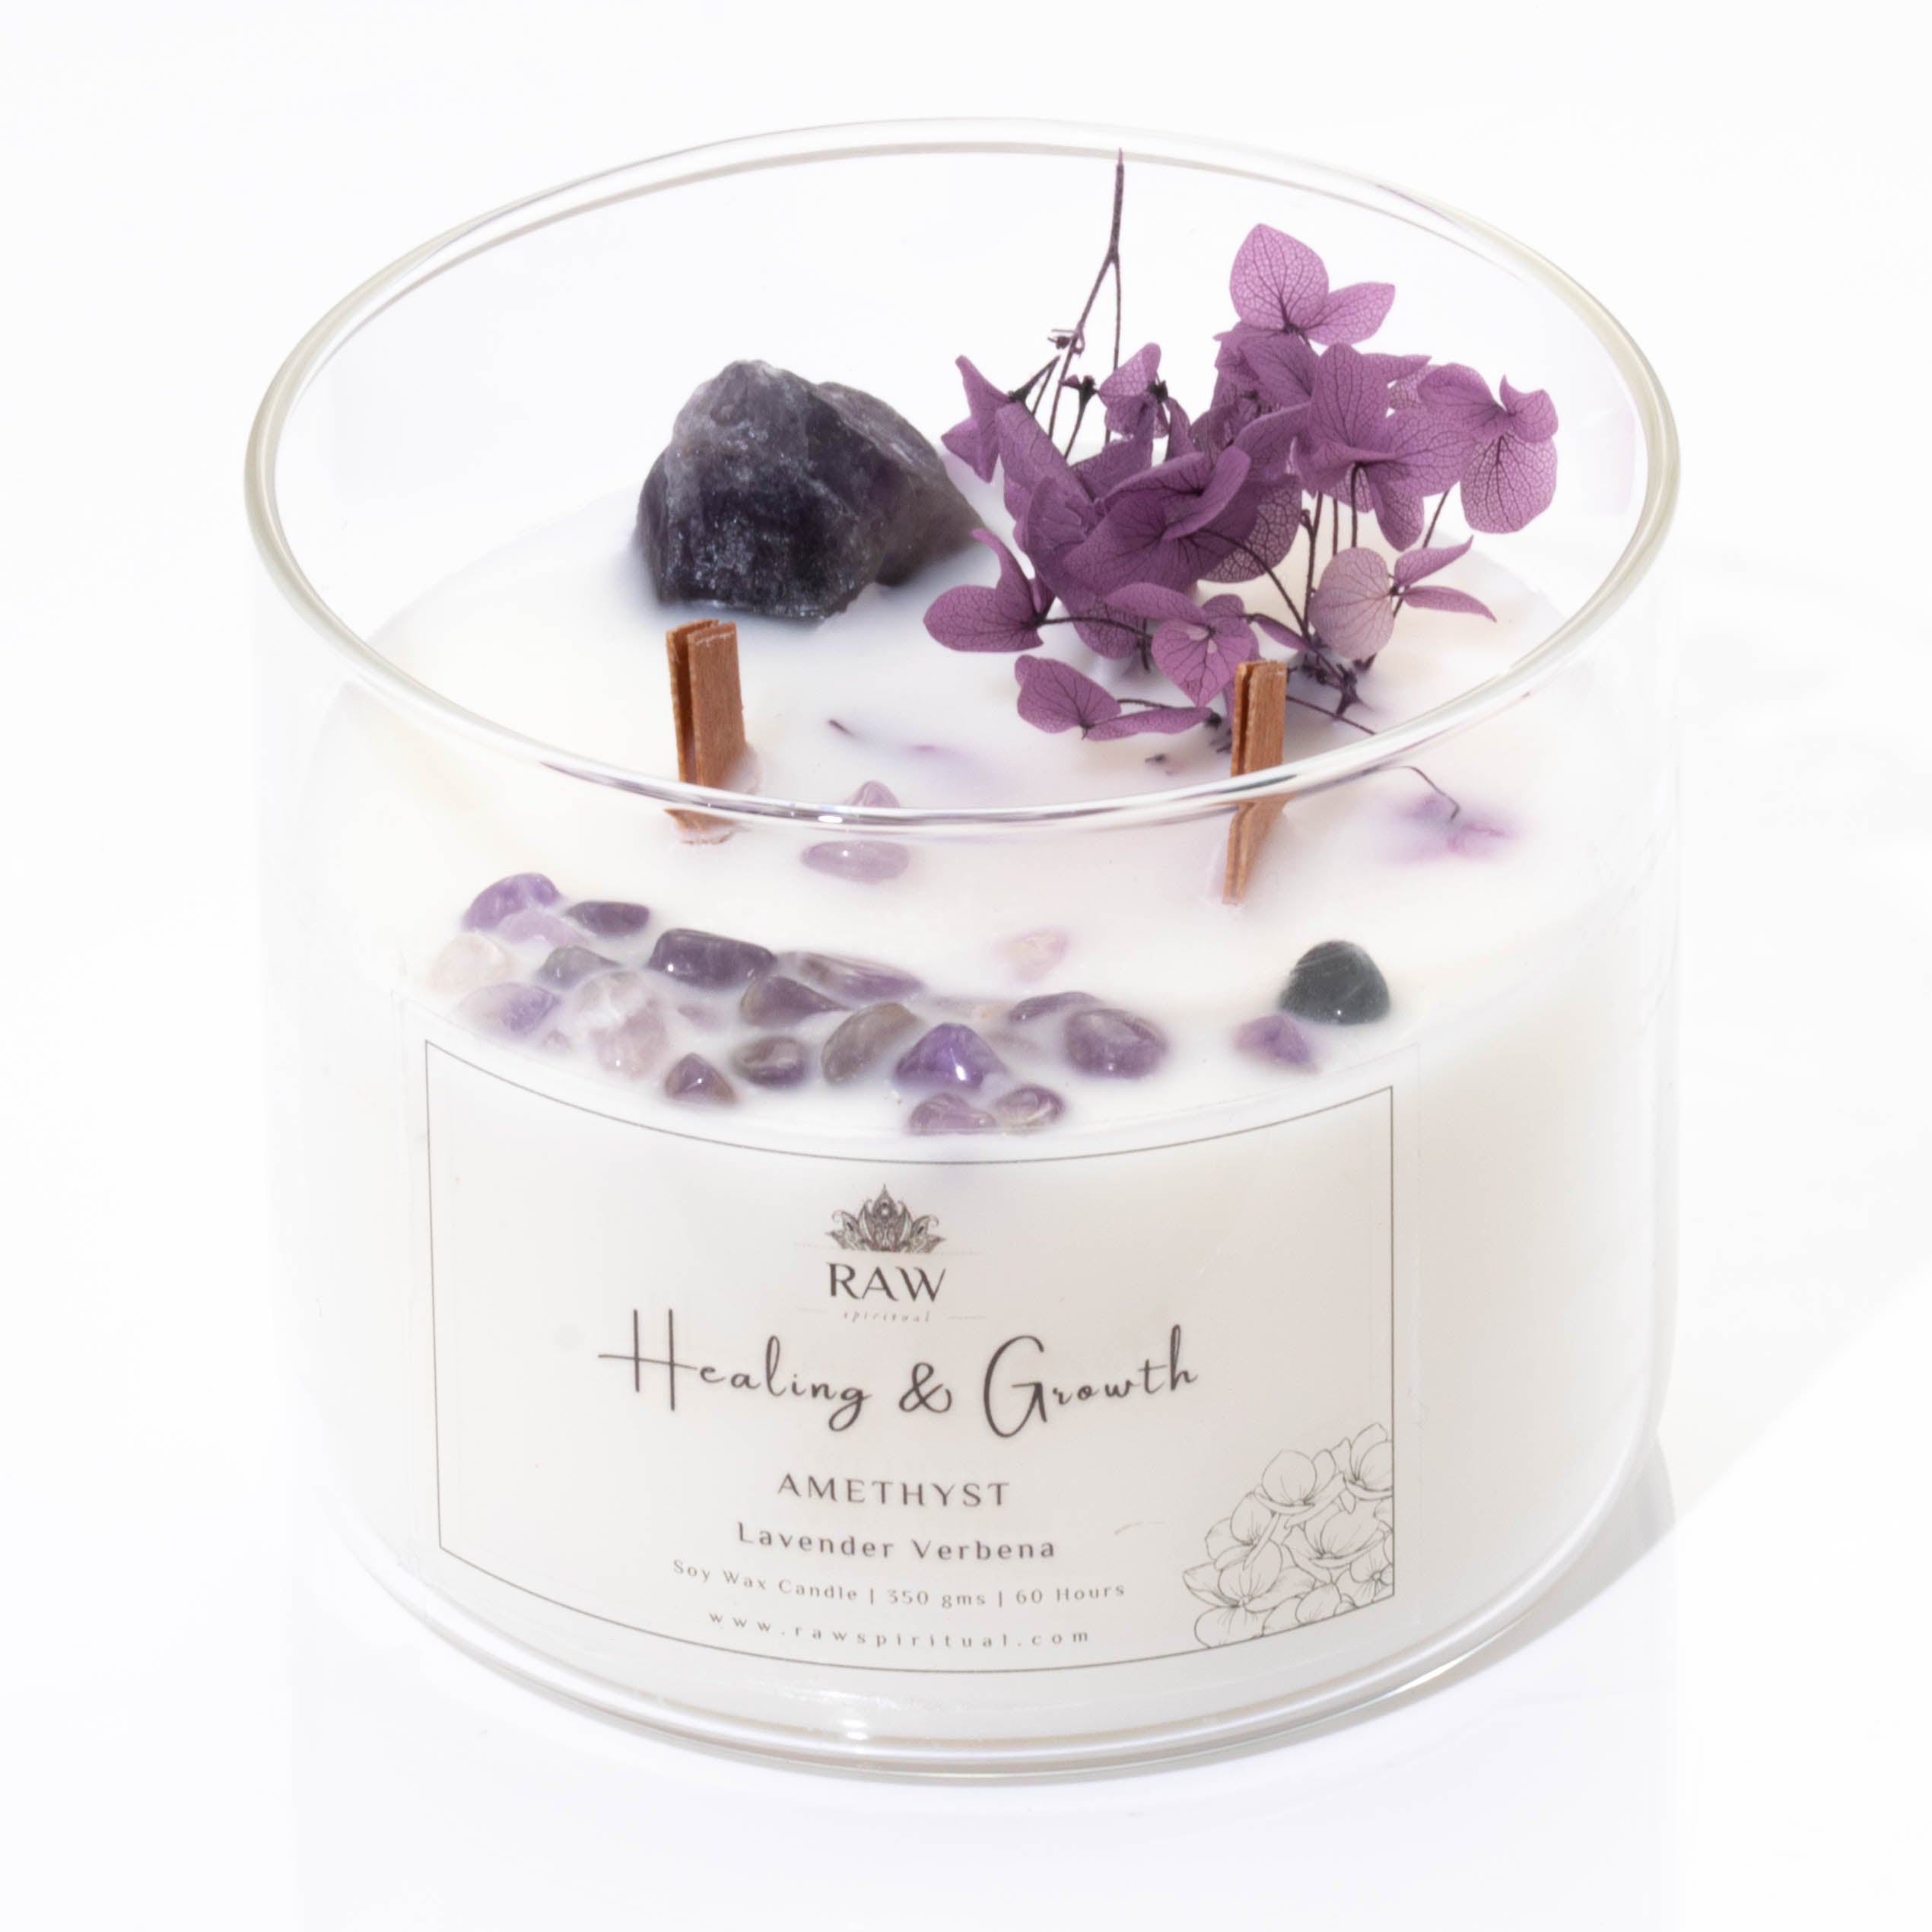 Amethyst Aromatherapy Crystal Candle for Healing & Growth